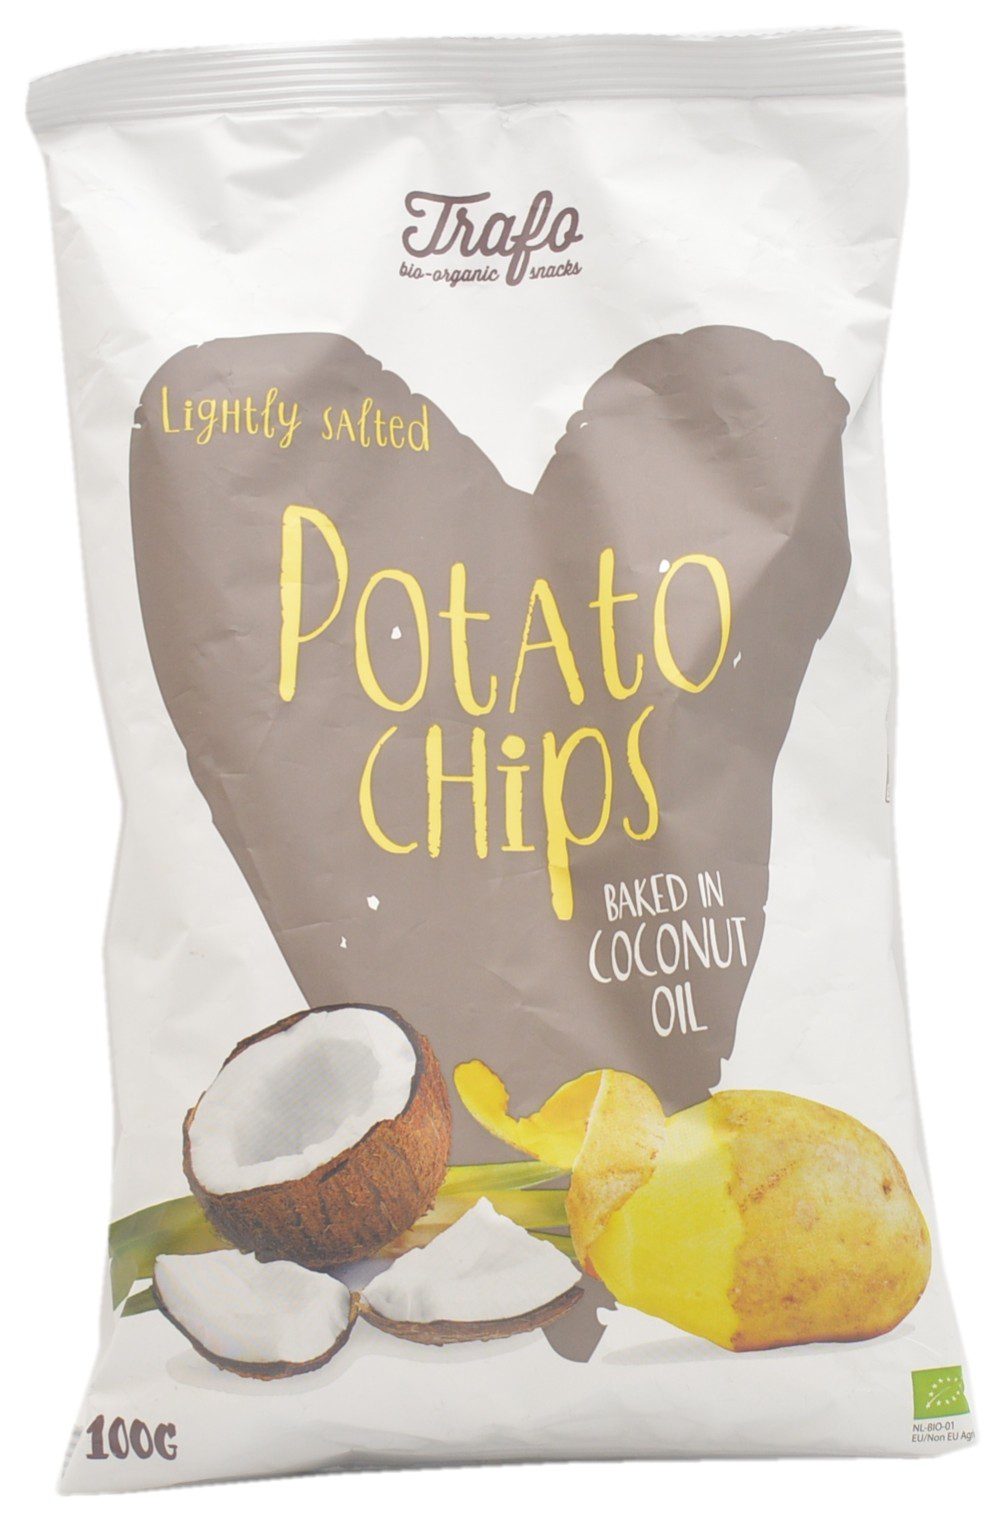 Lightly Salted Potato Chips Baked in Coconut Oil